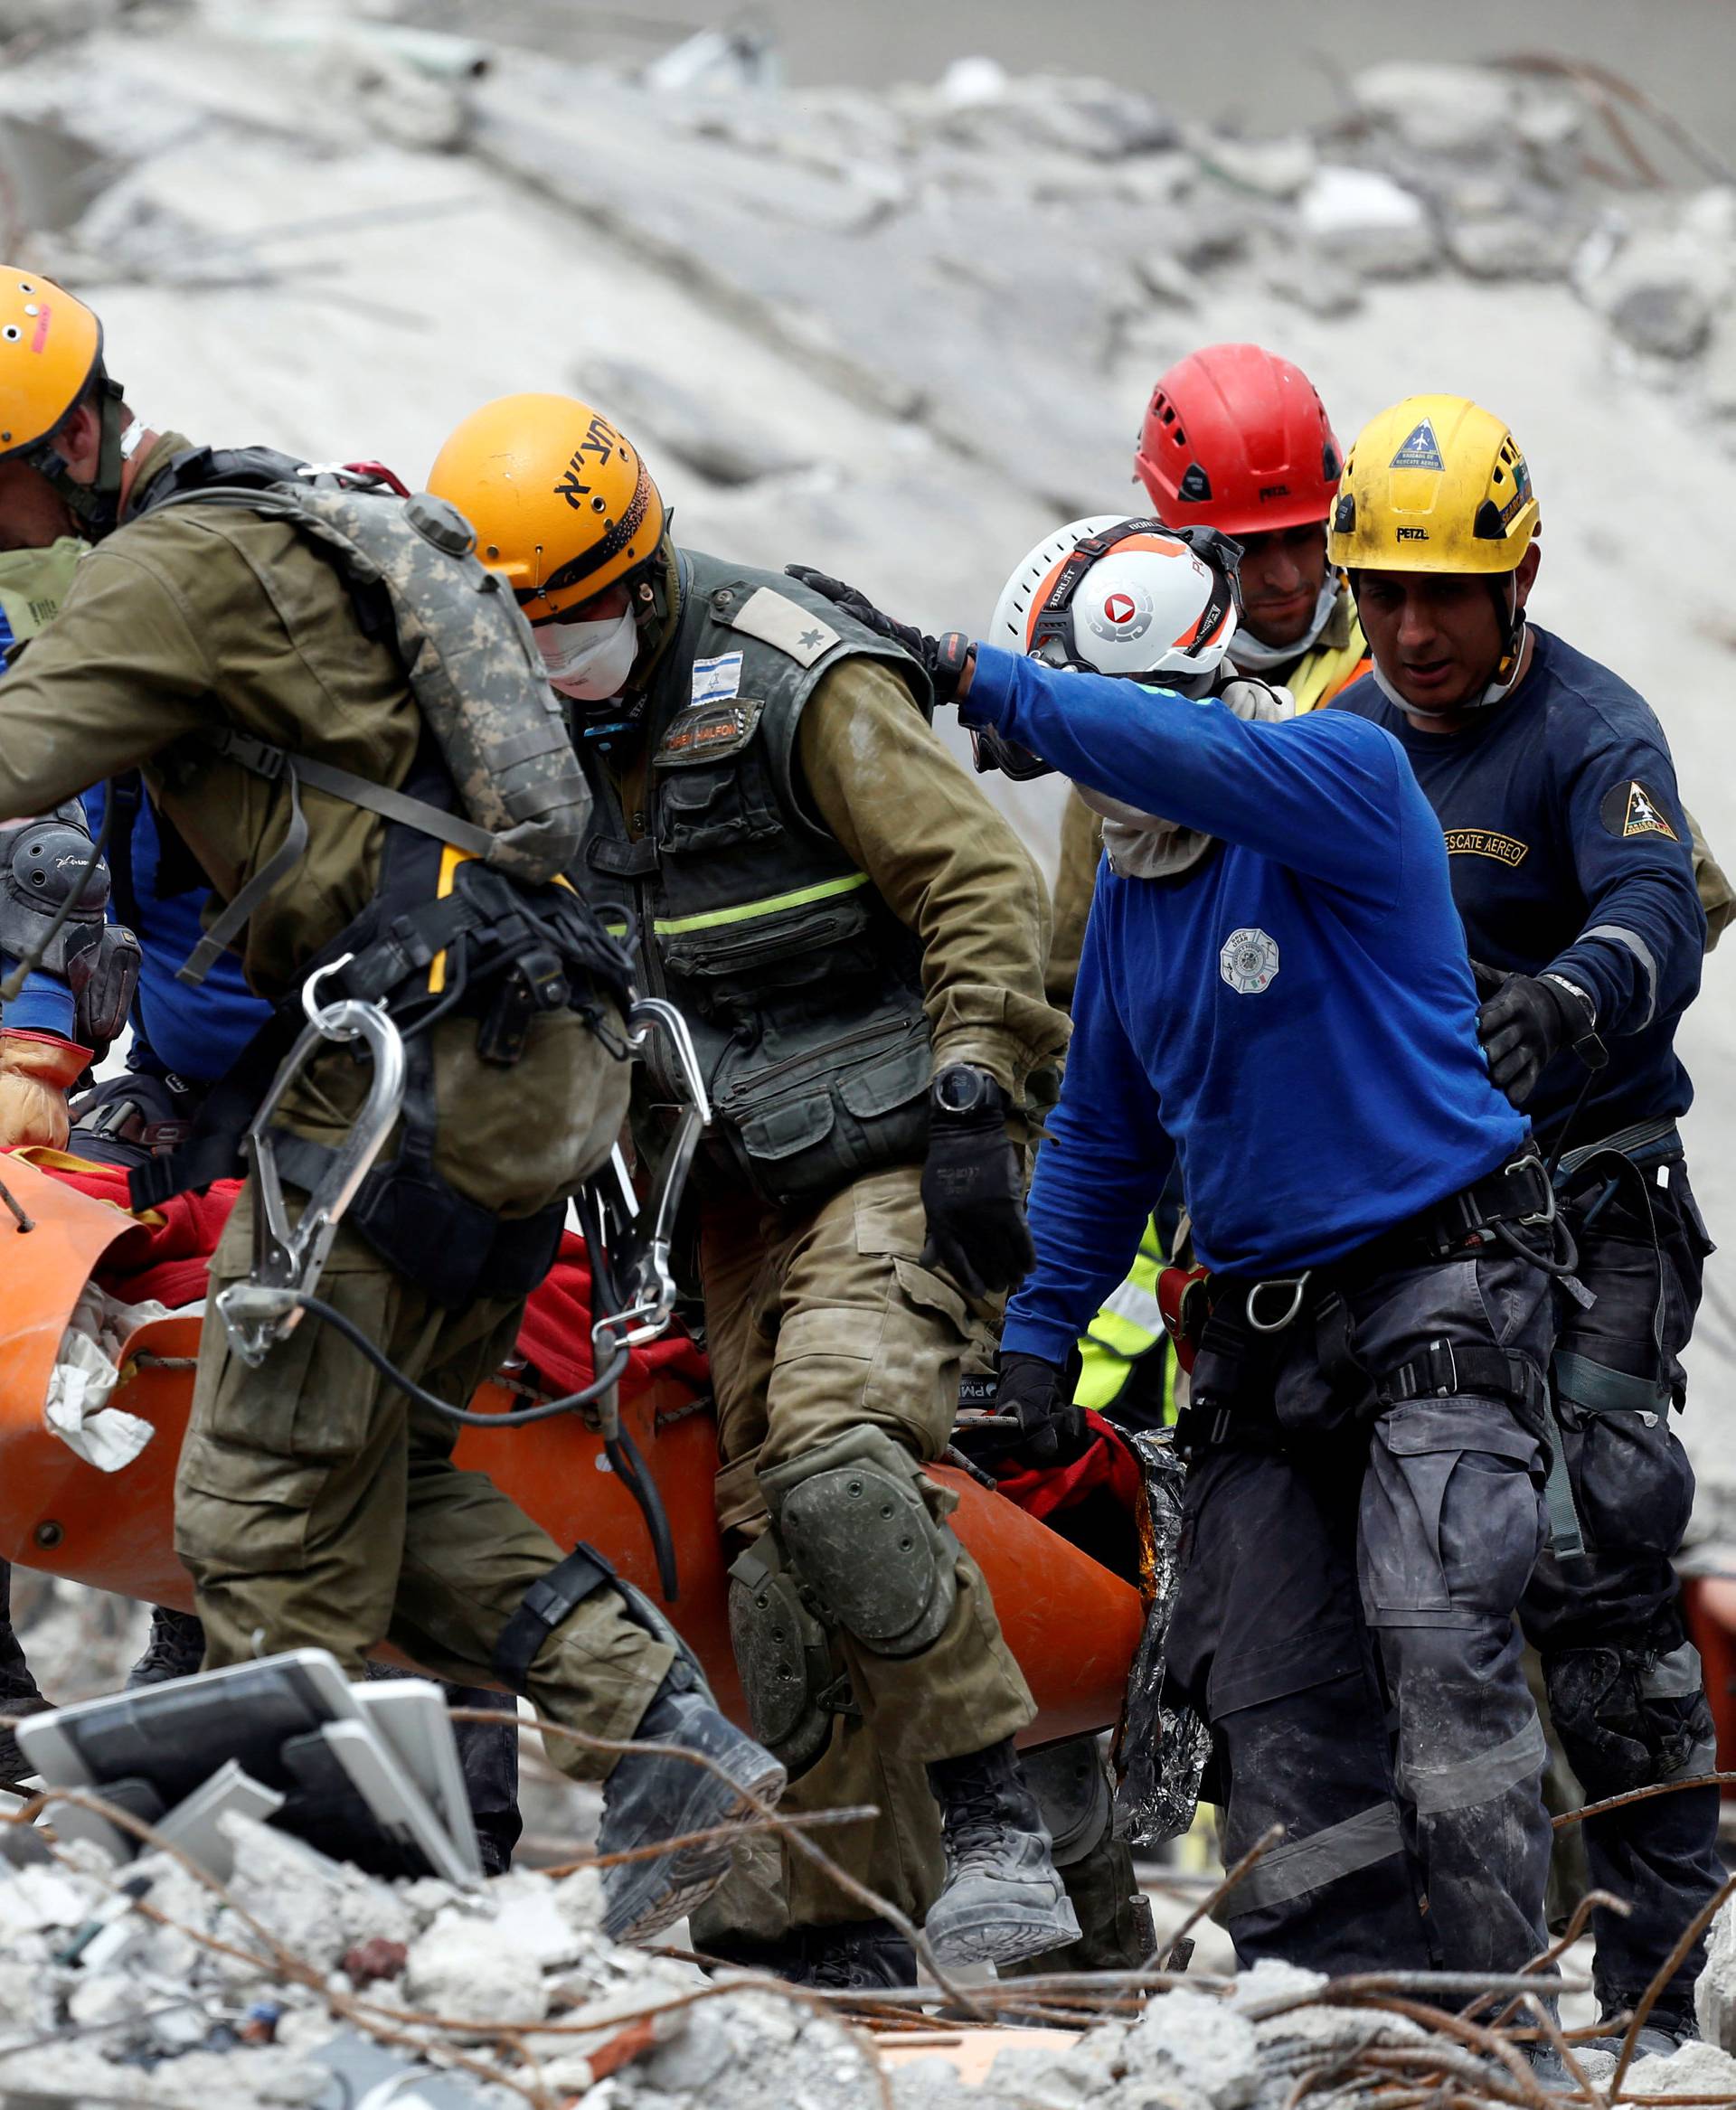 Members of Israeli and Mexican rescue teams carry a dead body after retrieving from a collapsed building after an earthquake in Mexico City